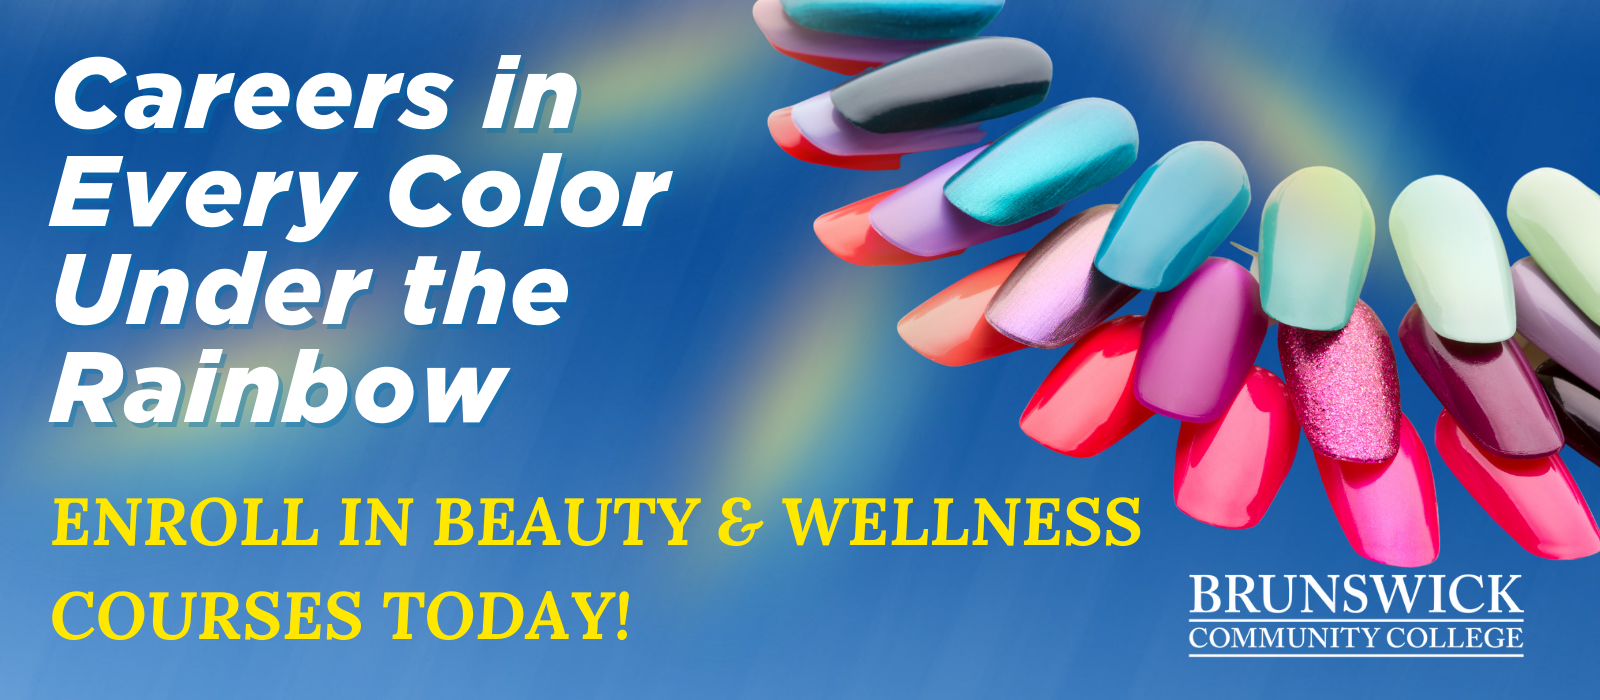 banner in support of beauty and wellness programs featuring brightly colored nail polish samples